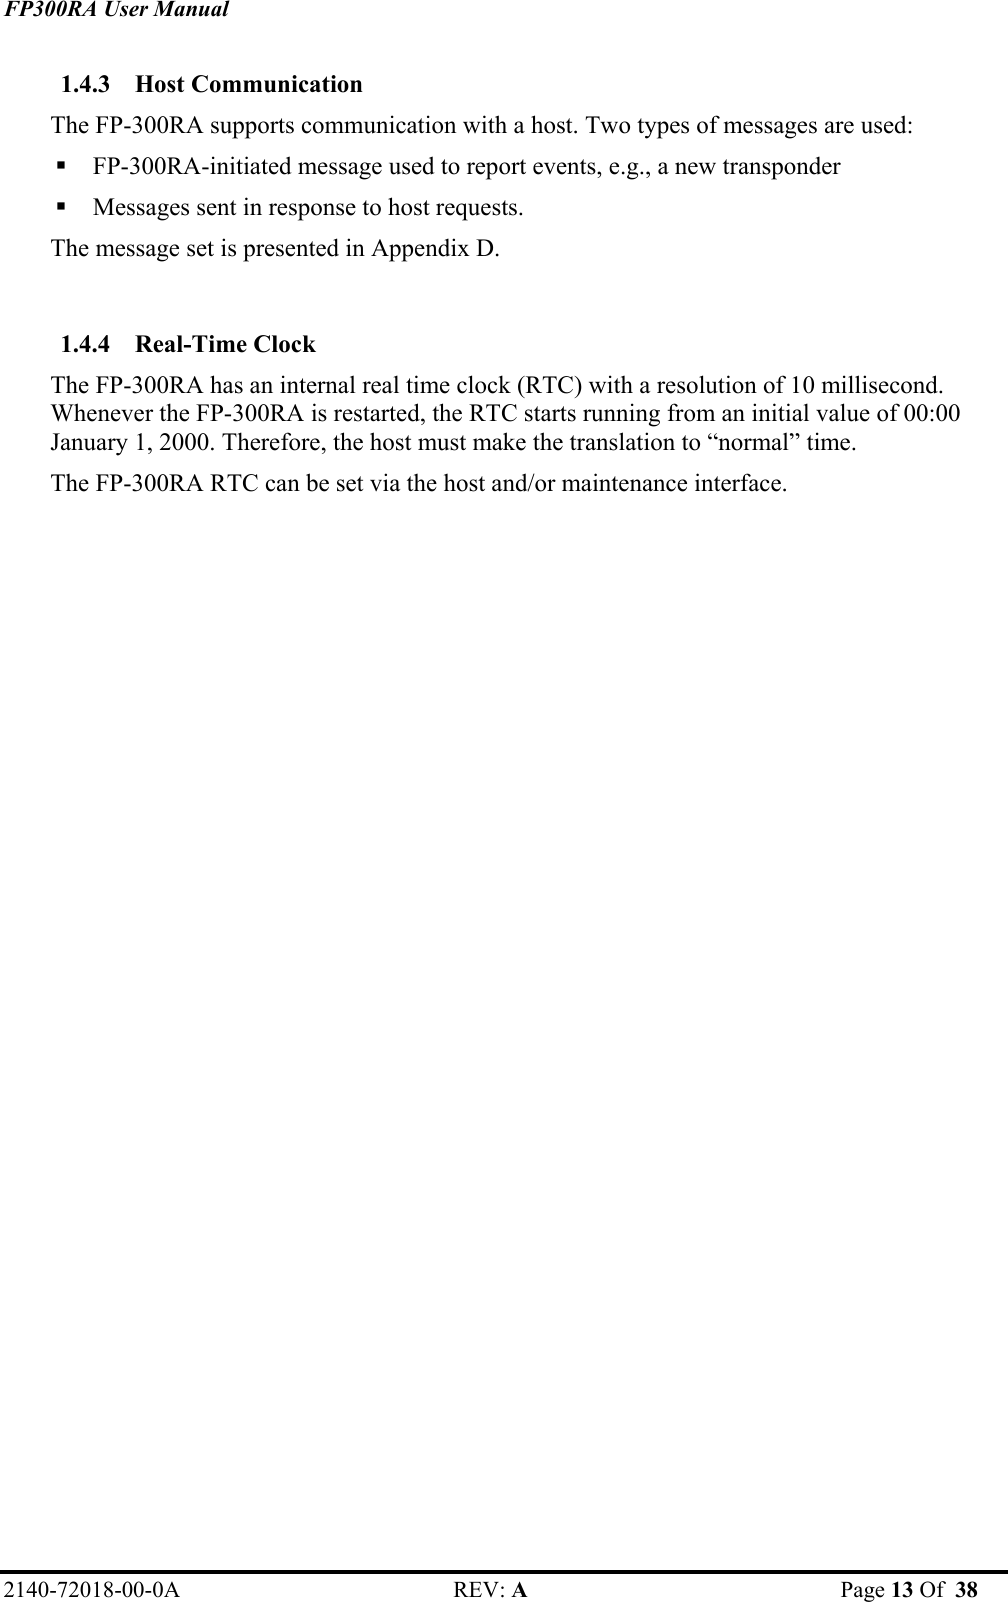 FP300RA User Manual 2140-72018-00-0A REV: A  Page 13 Of  38  1.4.3 Host Communication   The FP-300RA supports communication with a host. Two types of messages are used:  FP-300RA-initiated message used to report events, e.g., a new transponder  Messages sent in response to host requests.  The message set is presented in Appendix D.  1.4.4 Real-Time Clock   The FP-300RA has an internal real time clock (RTC) with a resolution of 10 millisecond. Whenever the FP-300RA is restarted, the RTC starts running from an initial value of 00:00 January 1, 2000. Therefore, the host must make the translation to “normal” time.  The FP-300RA RTC can be set via the host and/or maintenance interface.  